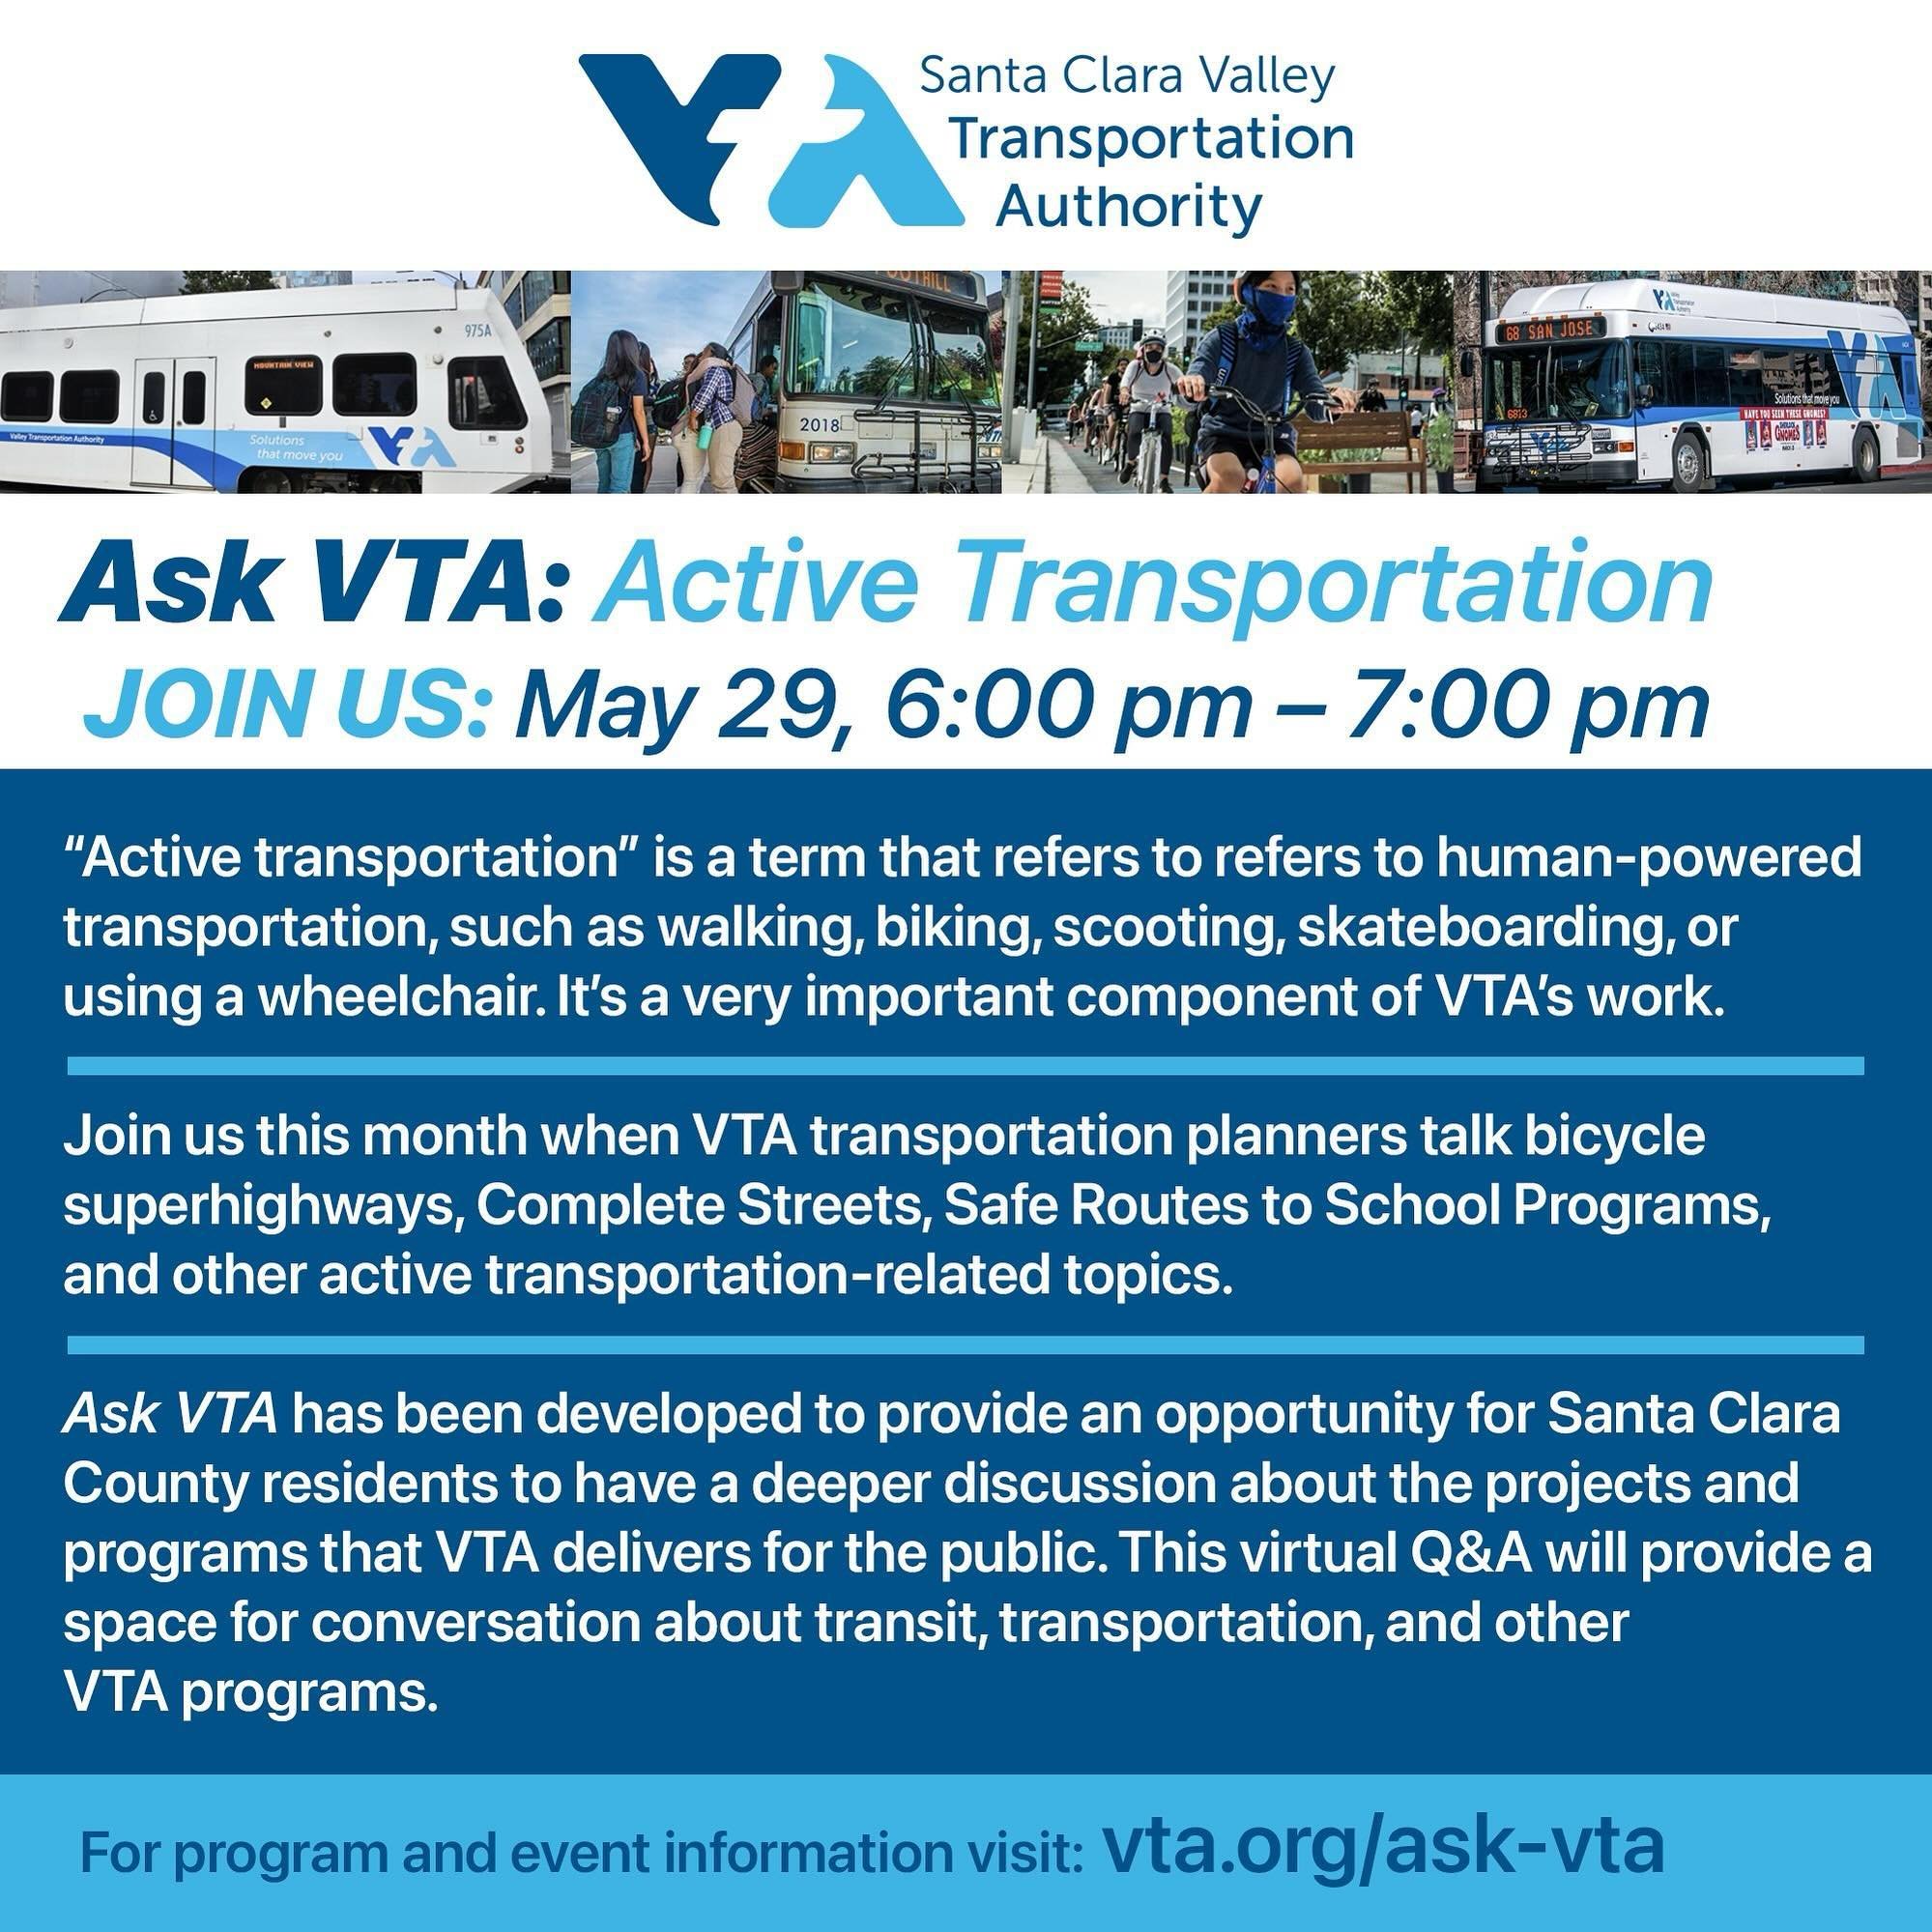 Mass transit and human-powered transport like cycling, skating, etc, are very important elements of our sustainable future. Join VTA officials and partners for a public discussion on Active Transportation May 29th 6-7pm.&nbsp;See http://www.vta.org/a